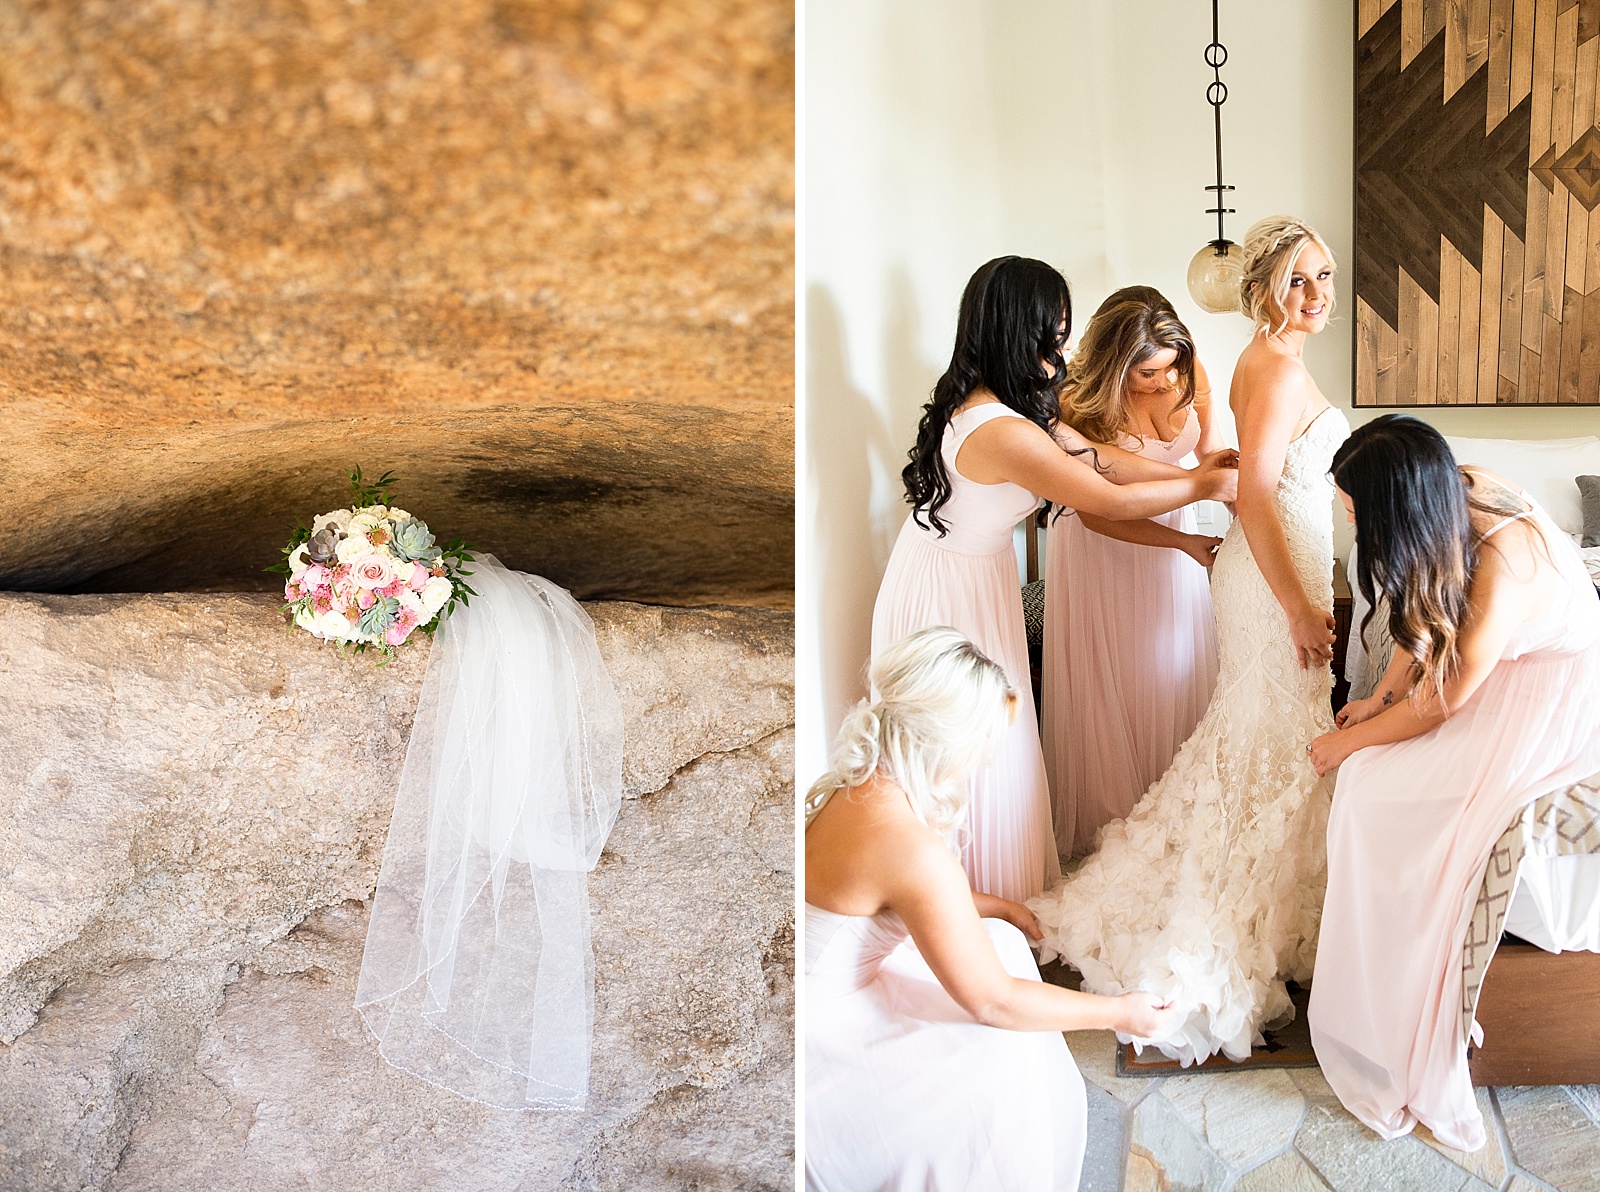 bride and bridesmaids prep for wedding day photographed by AZ photographer Randi Michelle Photography